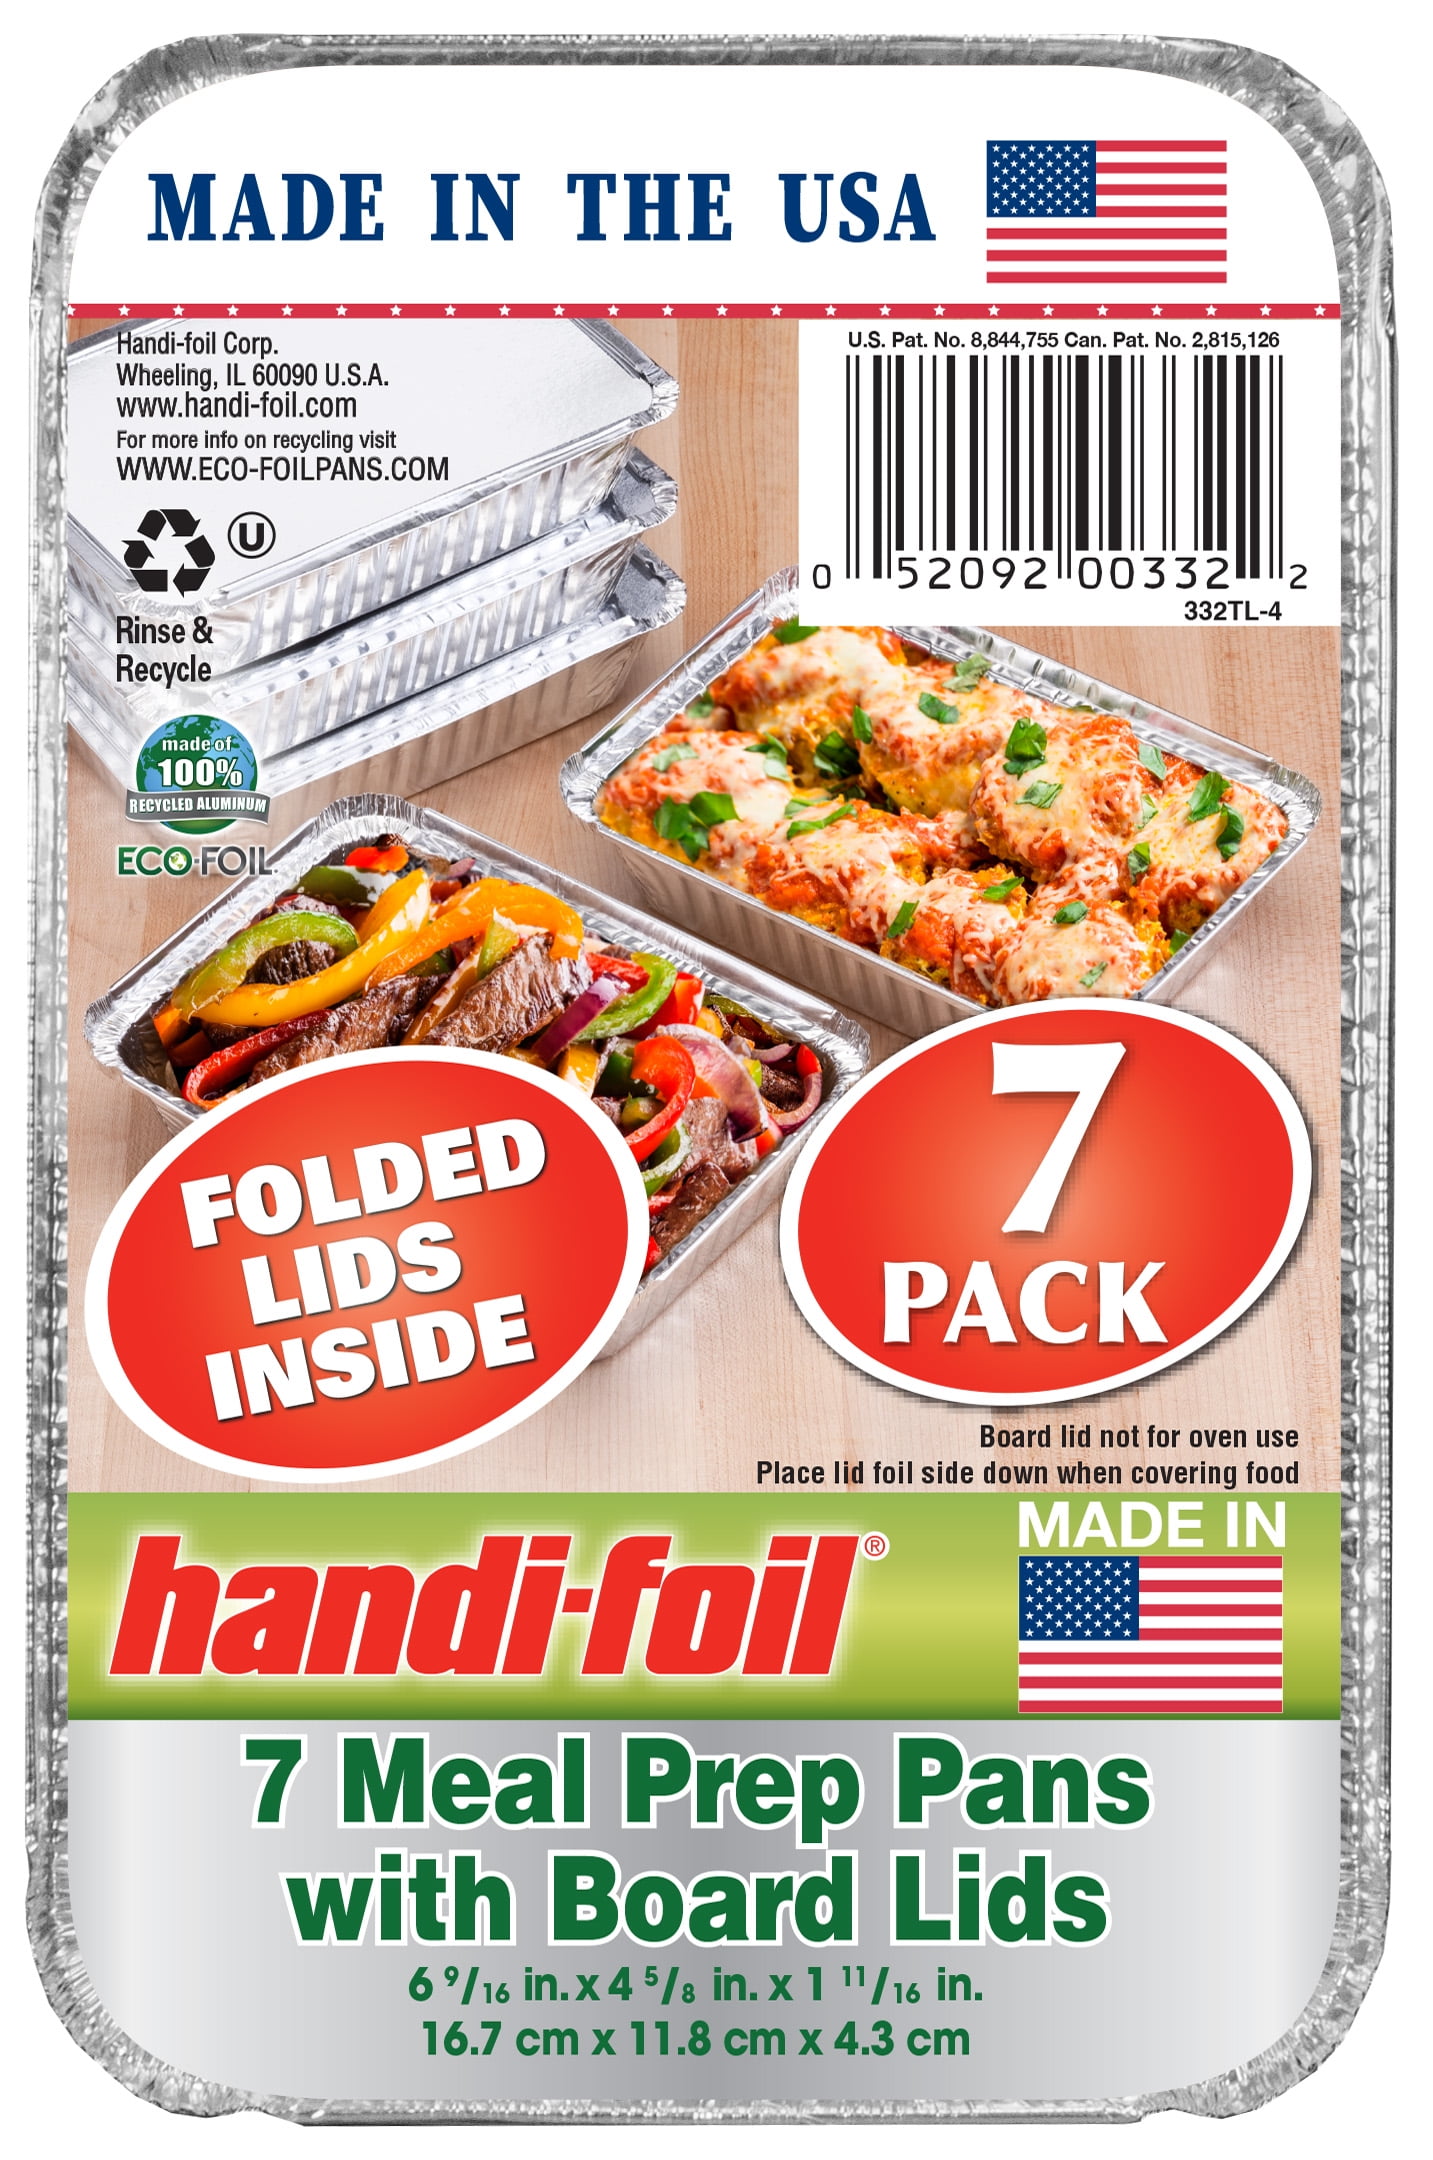 Handi-Foil Storage Containers with Board Lids, Extra Large